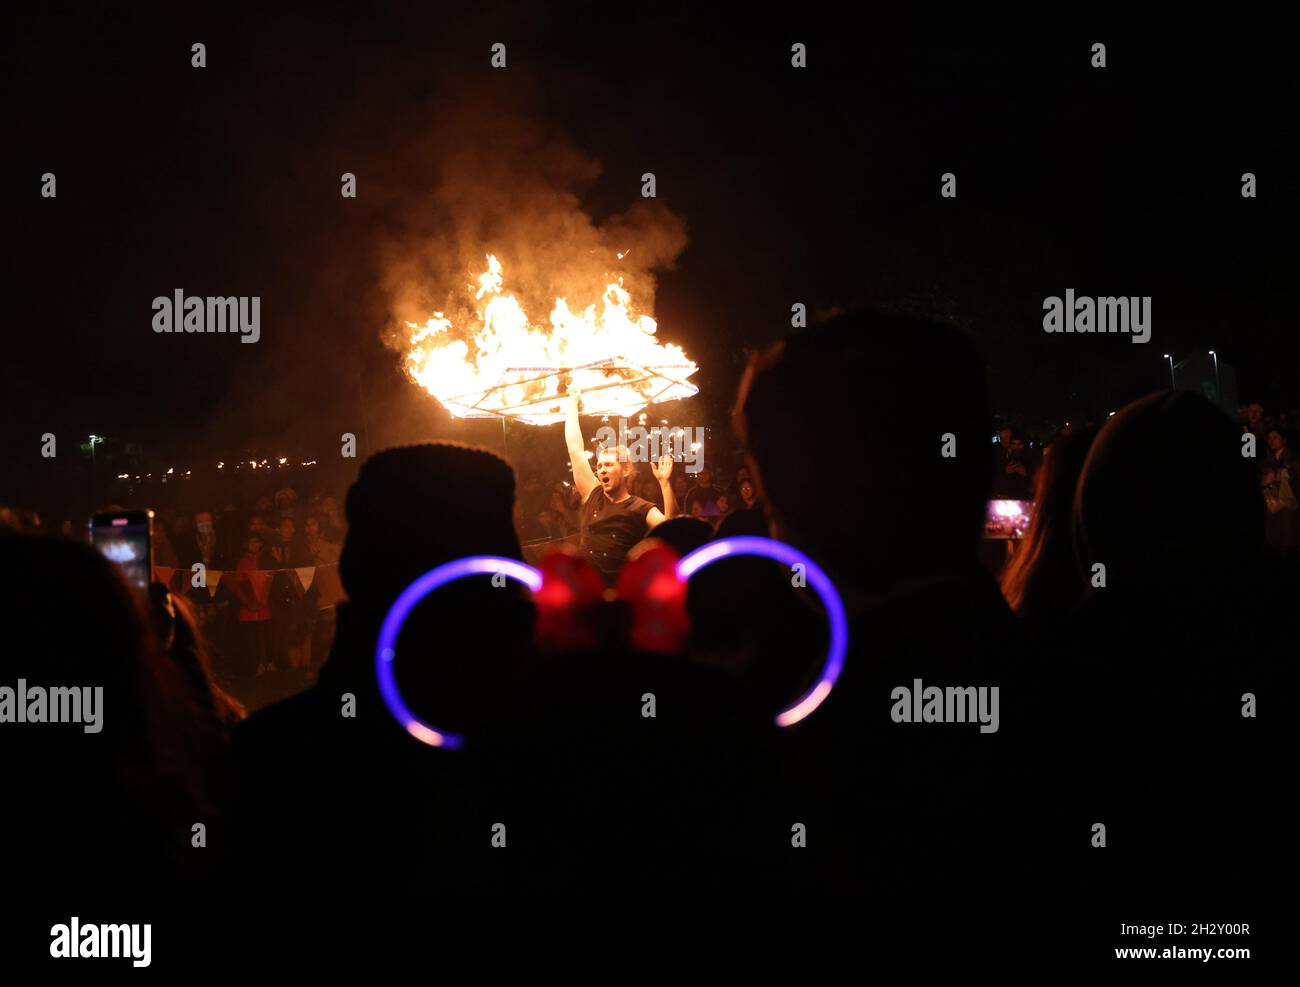 Leicester, Leicestershire, UK. 24th October 2021. People watch a fire show during a different Diwali lights switch on event from normal with no main stage or firework display because of Covid-19 worries. Credit Darren Staples/Alamy Live News. Stock Photo